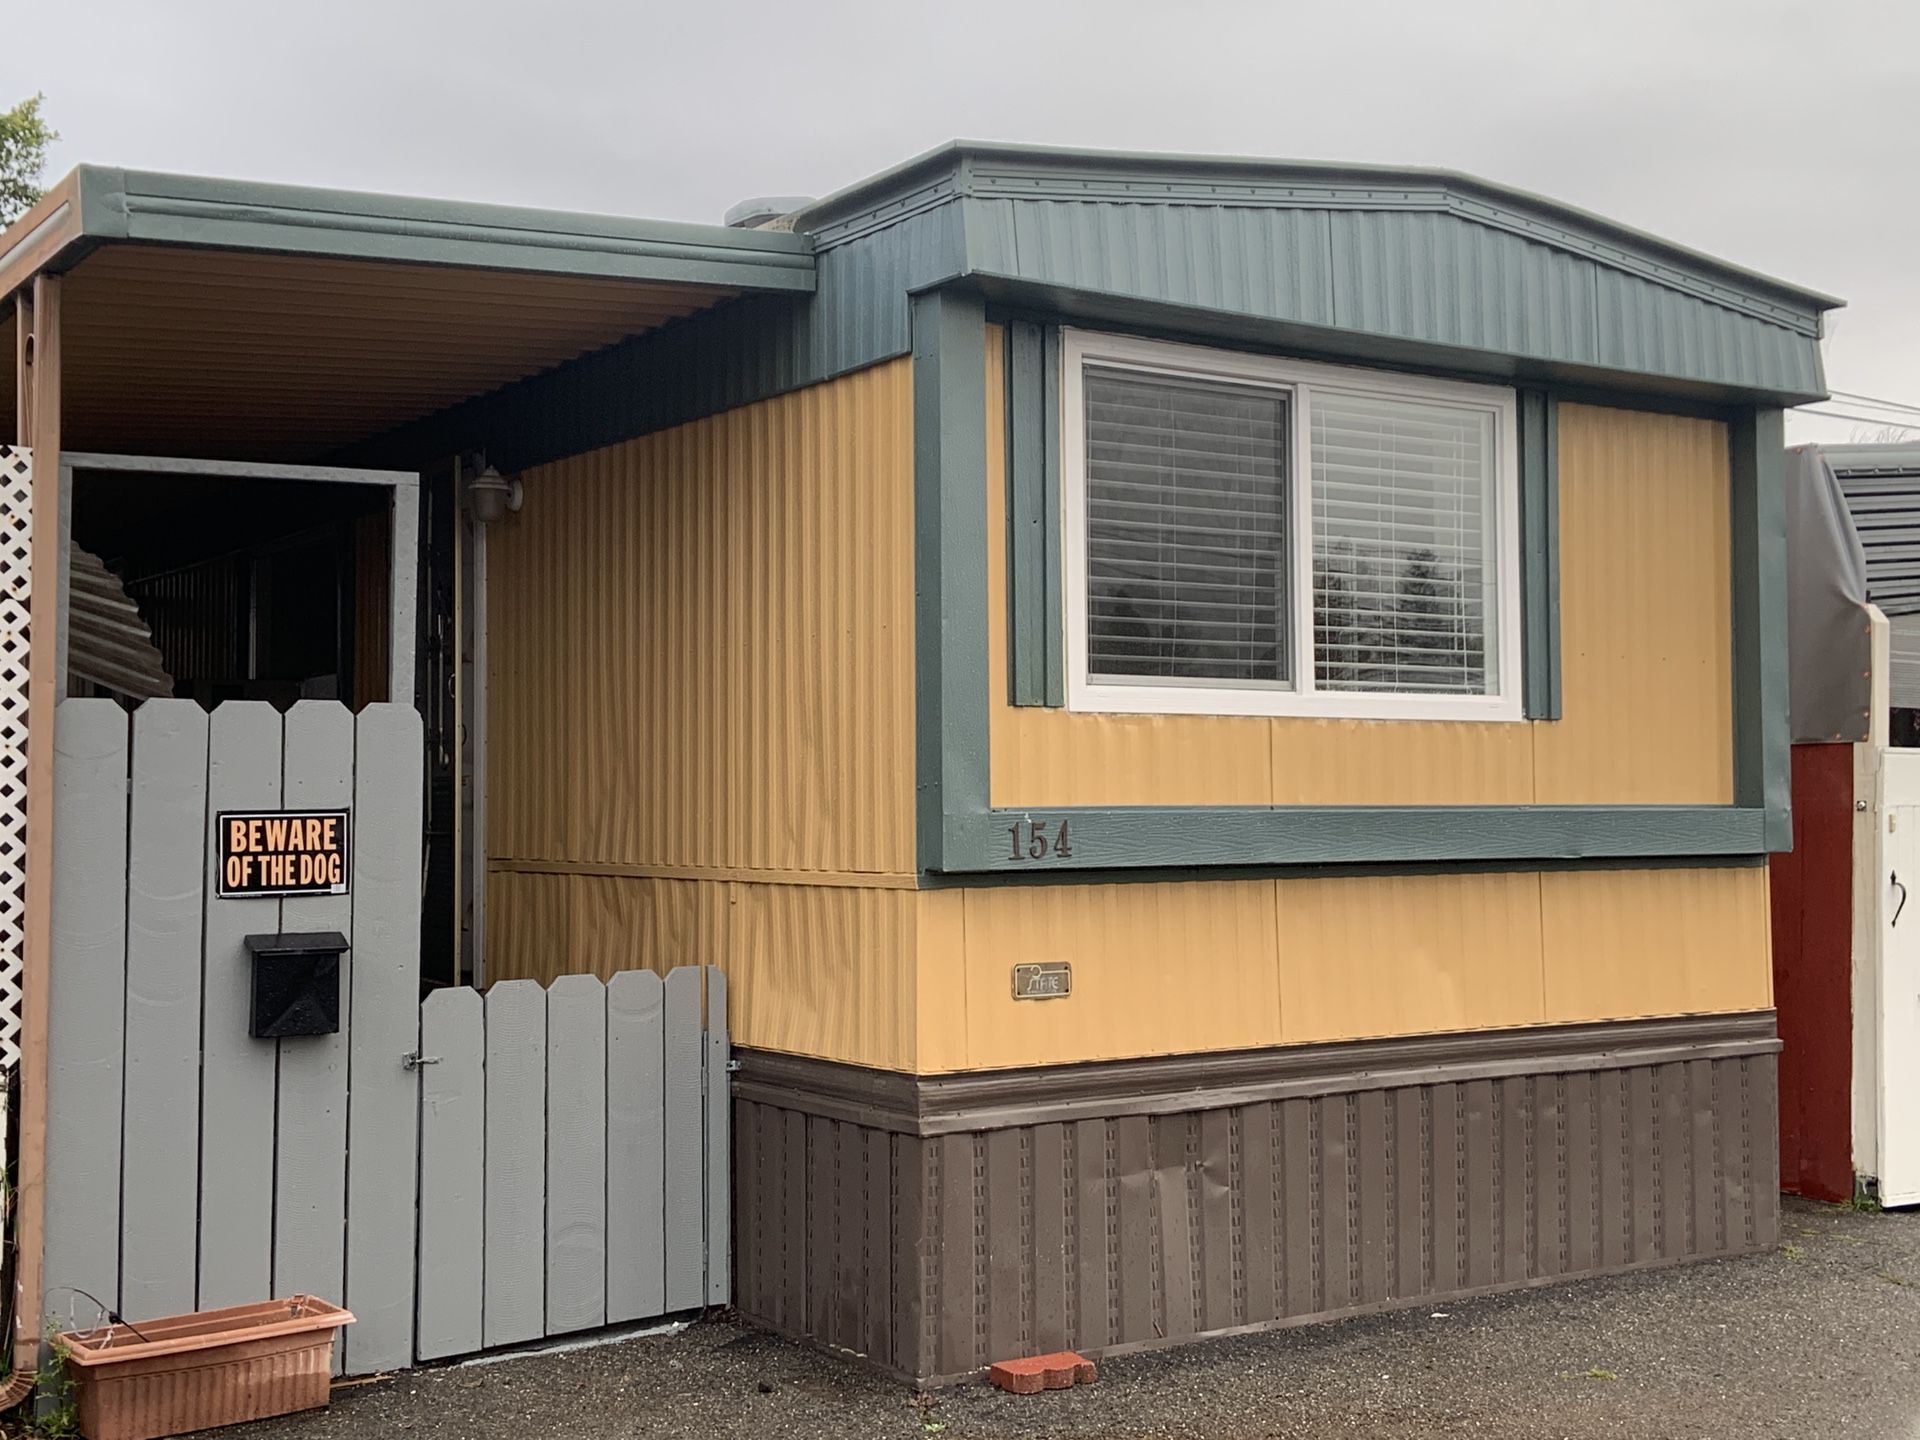 Own your own One Bedroom Mobile home in San Leandro for $500 a month!